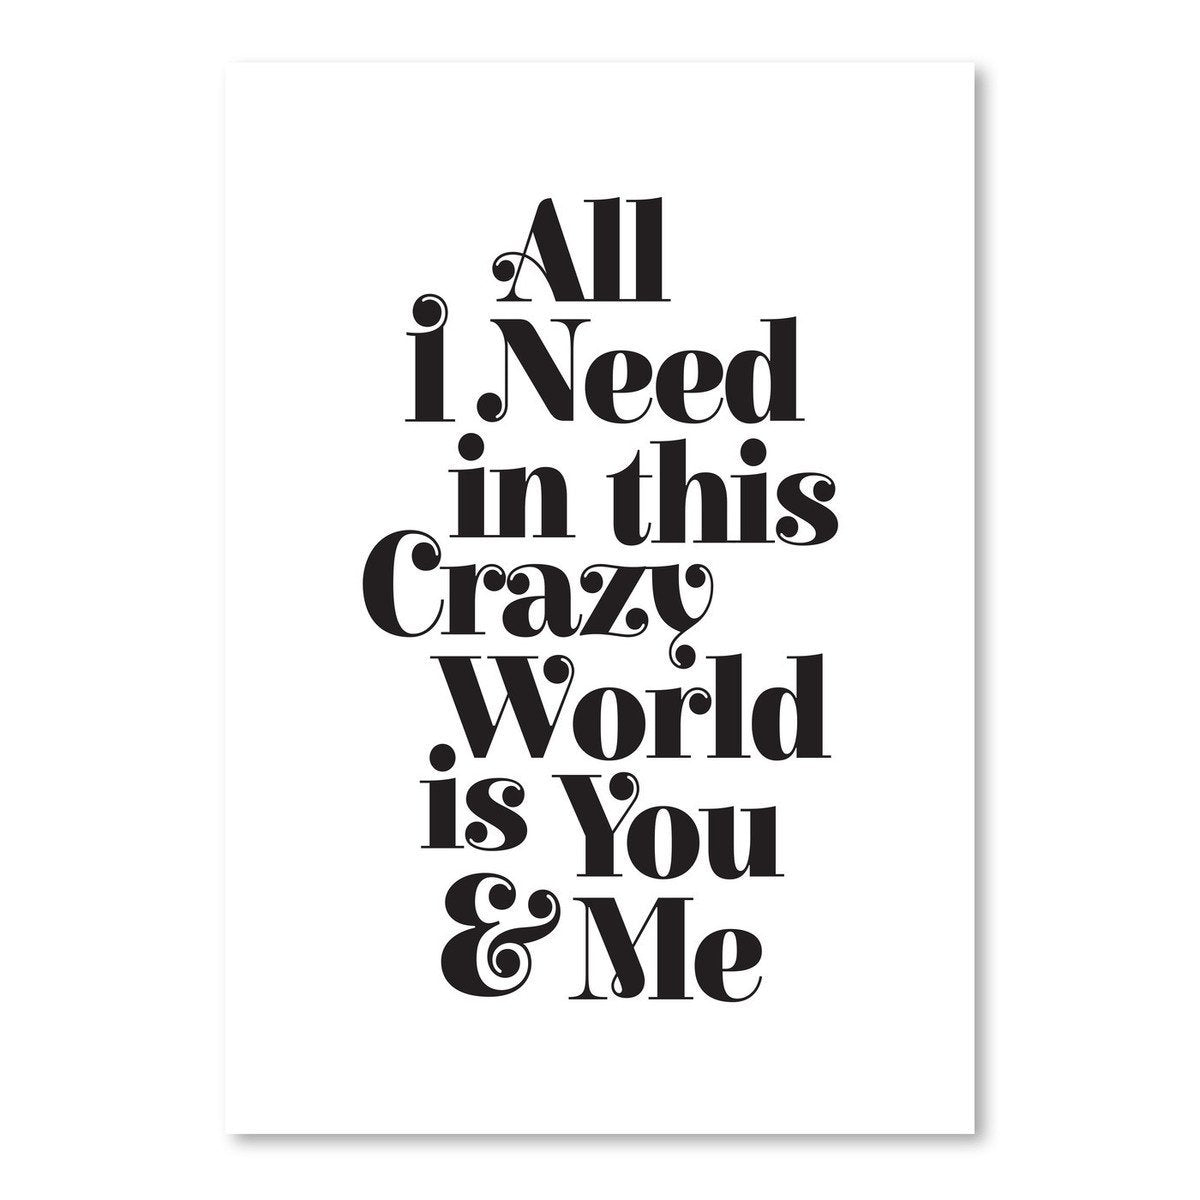 All I Need In This Crazy World Is You And Me by Motivated Type - Art Print - Americanflat